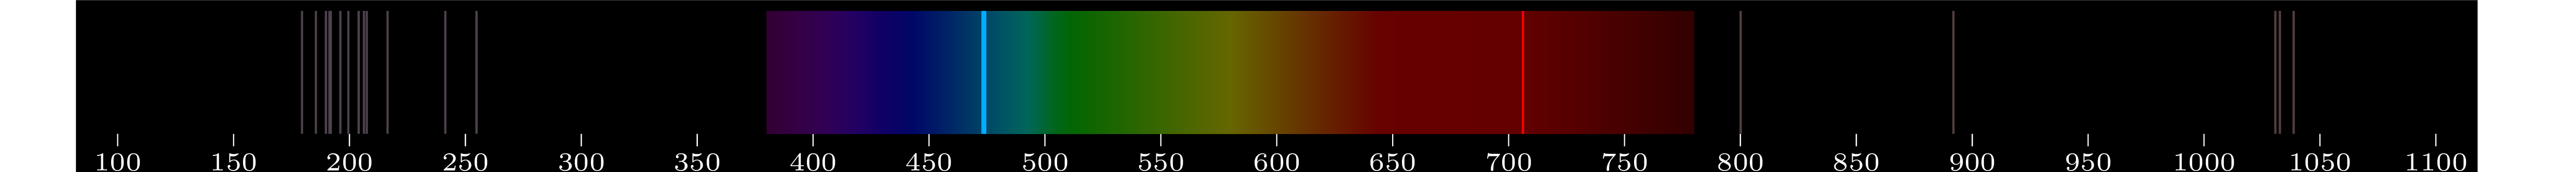 emmision spectra of element Se